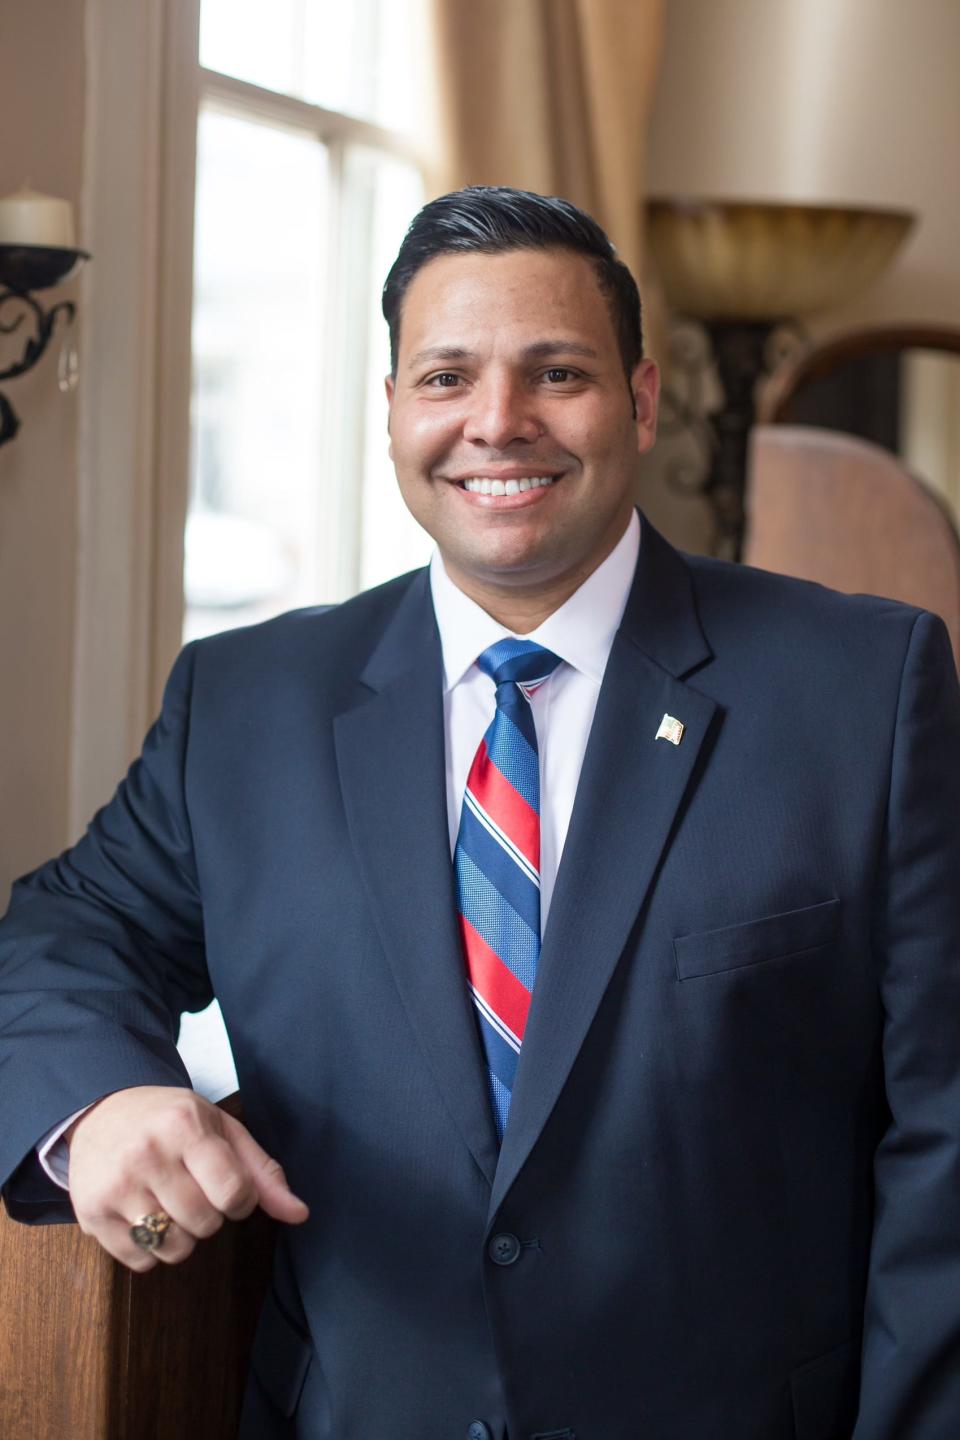 Clarence W. Goins Jr., candidate for NC House District 43